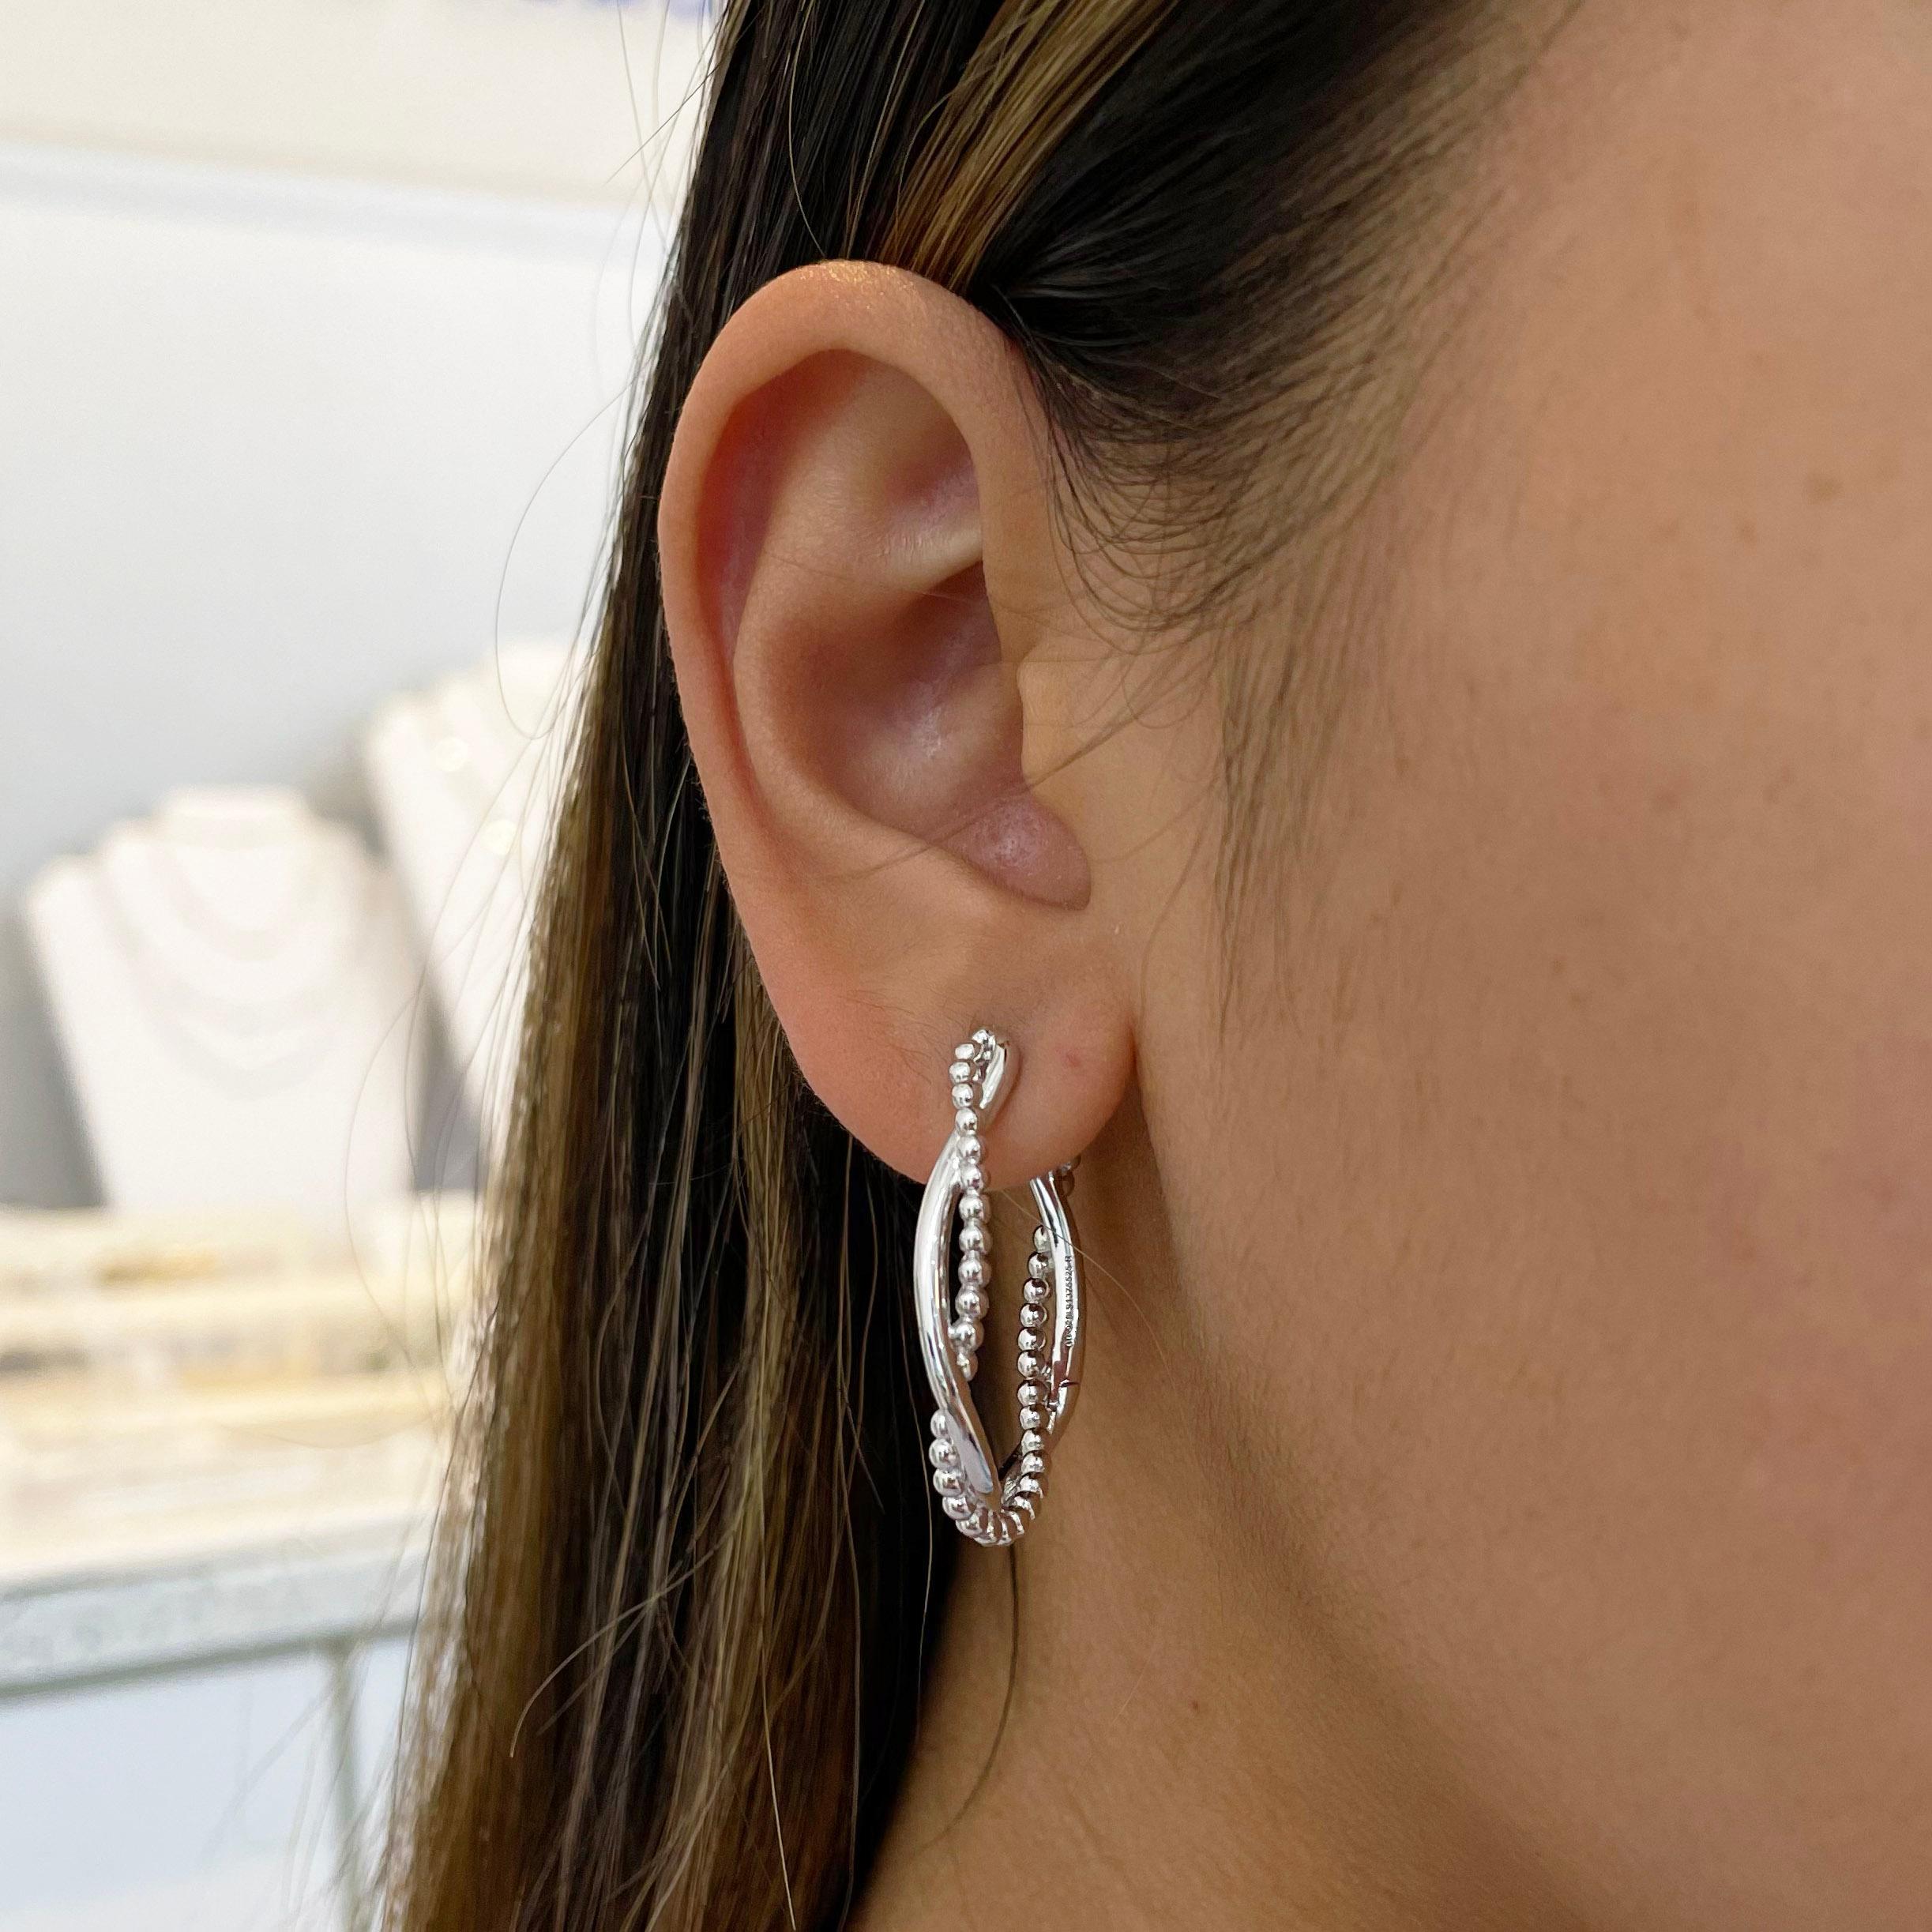 Contemporary Twisted Hoop Earring in Sterling Silver W Patented Screw on Backs Perfect W Mask For Sale